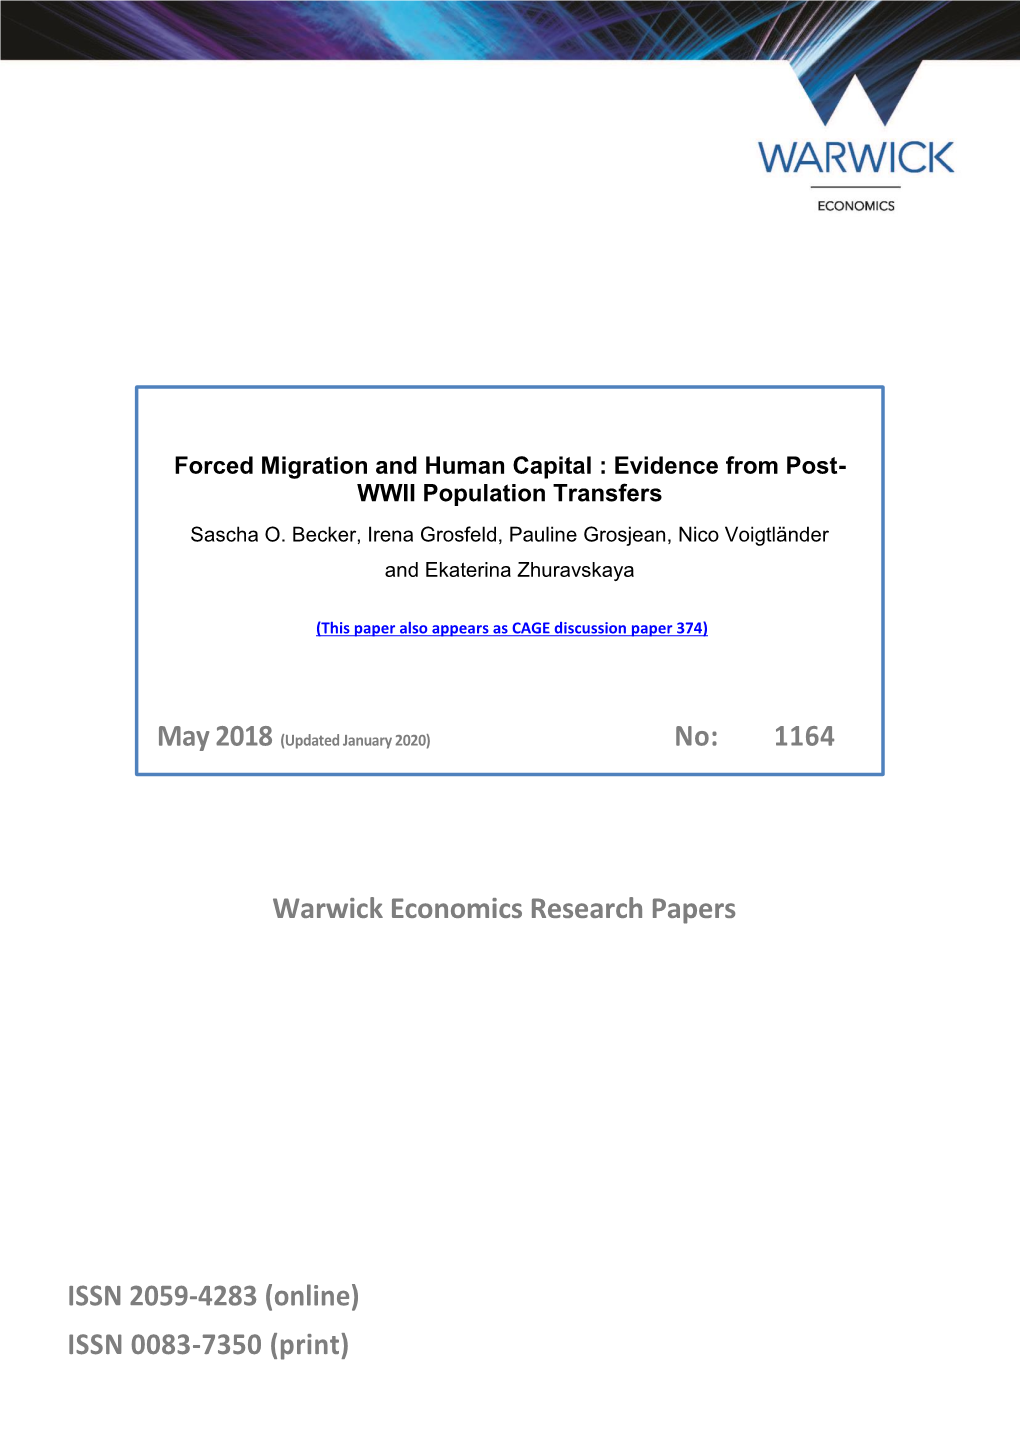 Forced Migration and Human Capital : Evidence from Post- WWII Population Transfers